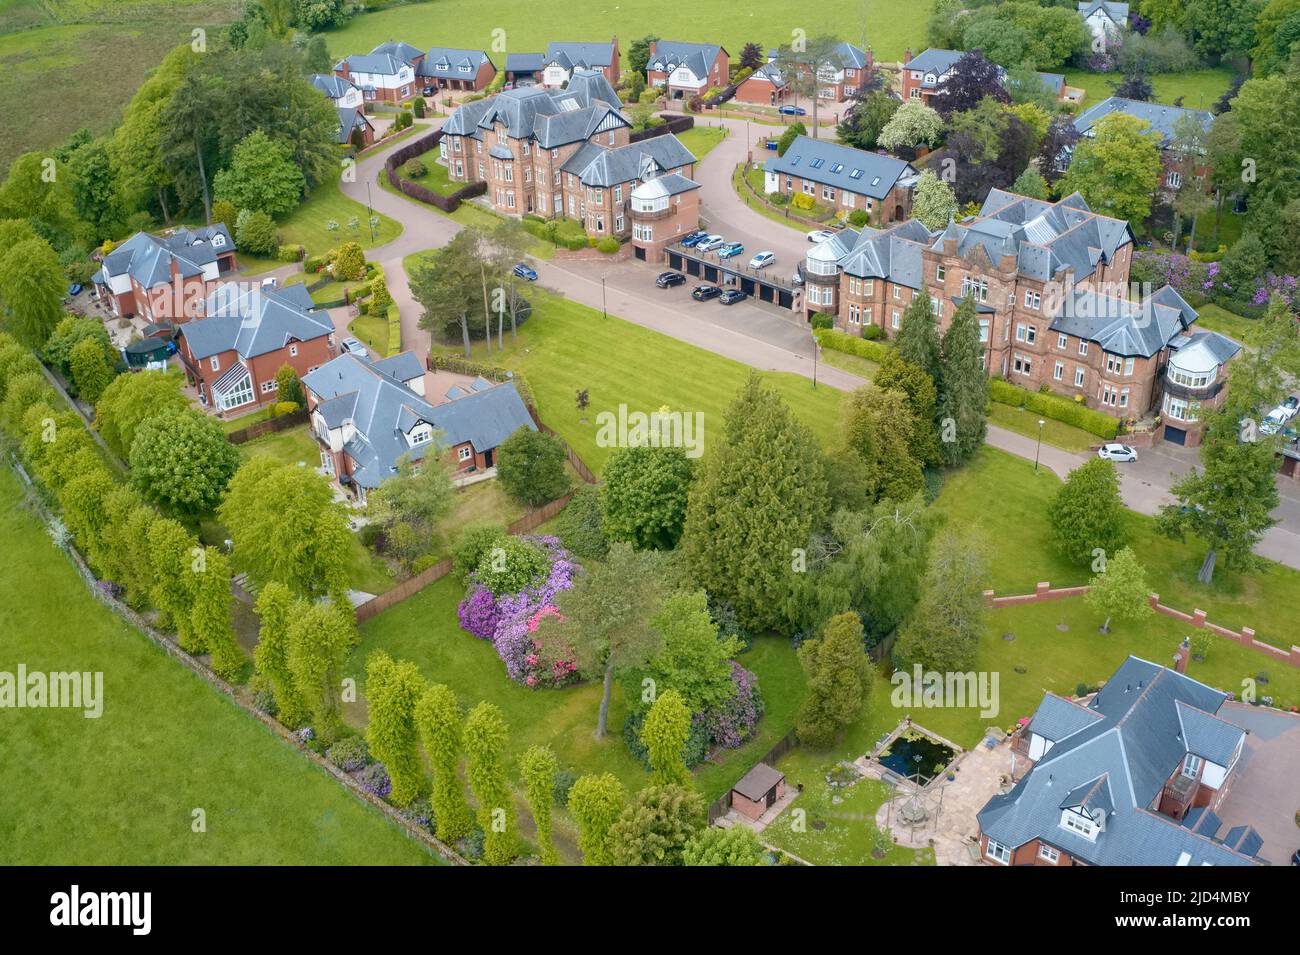 Luxury countryside rural village aerial view from above in St Andrews Scotland UK Stock Photo